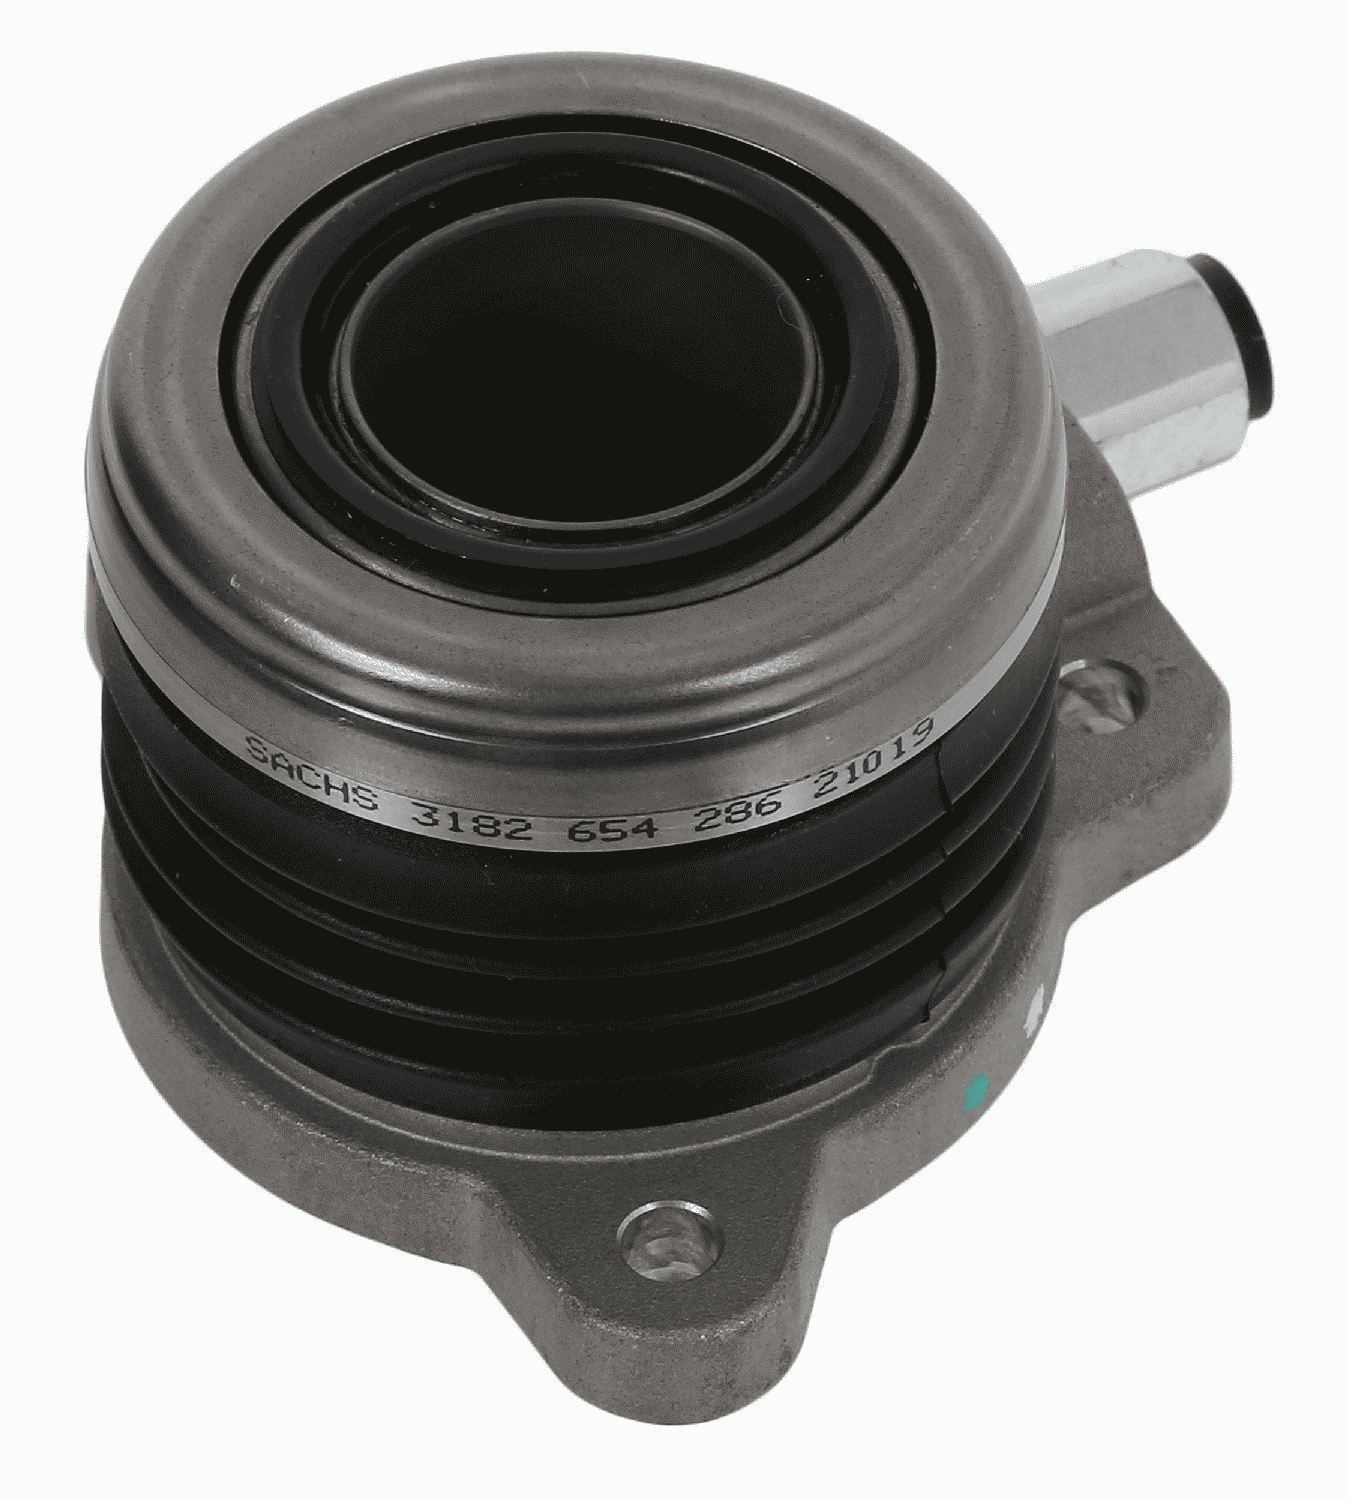 Great value for money - SACHS Central Slave Cylinder, clutch 3182 654 286